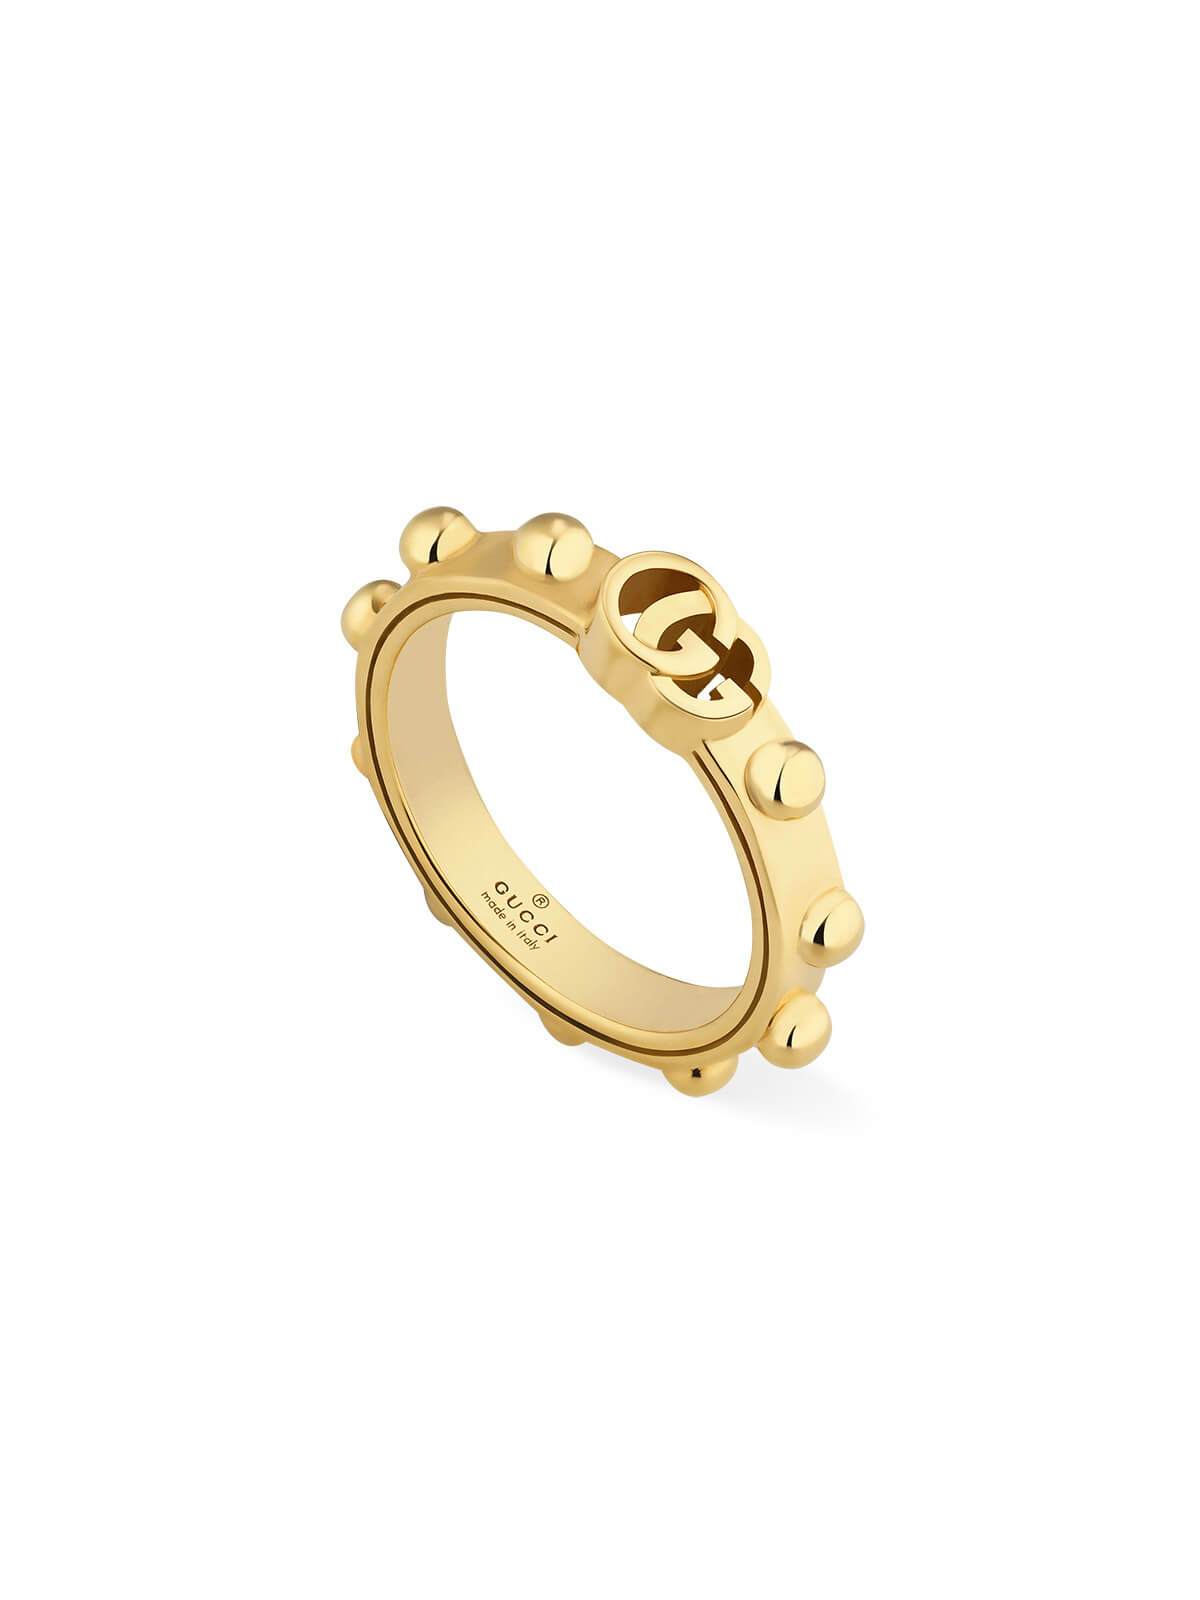 Gucci GG Running Ring in 18ct Yellow Gold - Size M-N YBC554643001013